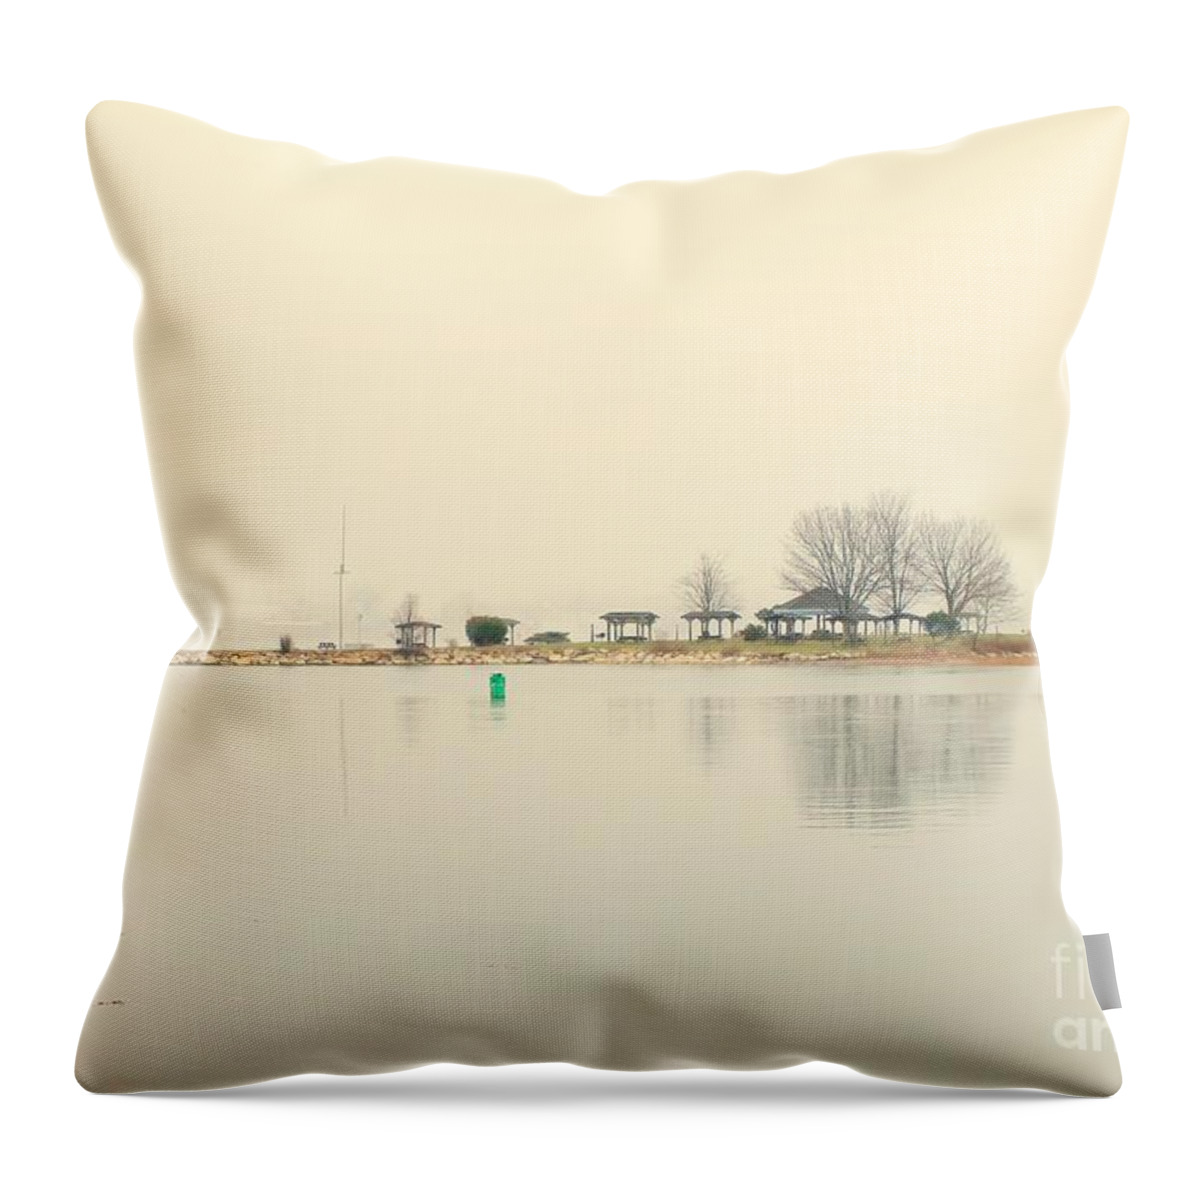 Island View Throw Pillow featuring the photograph Peirce Island by Marcia Lee Jones